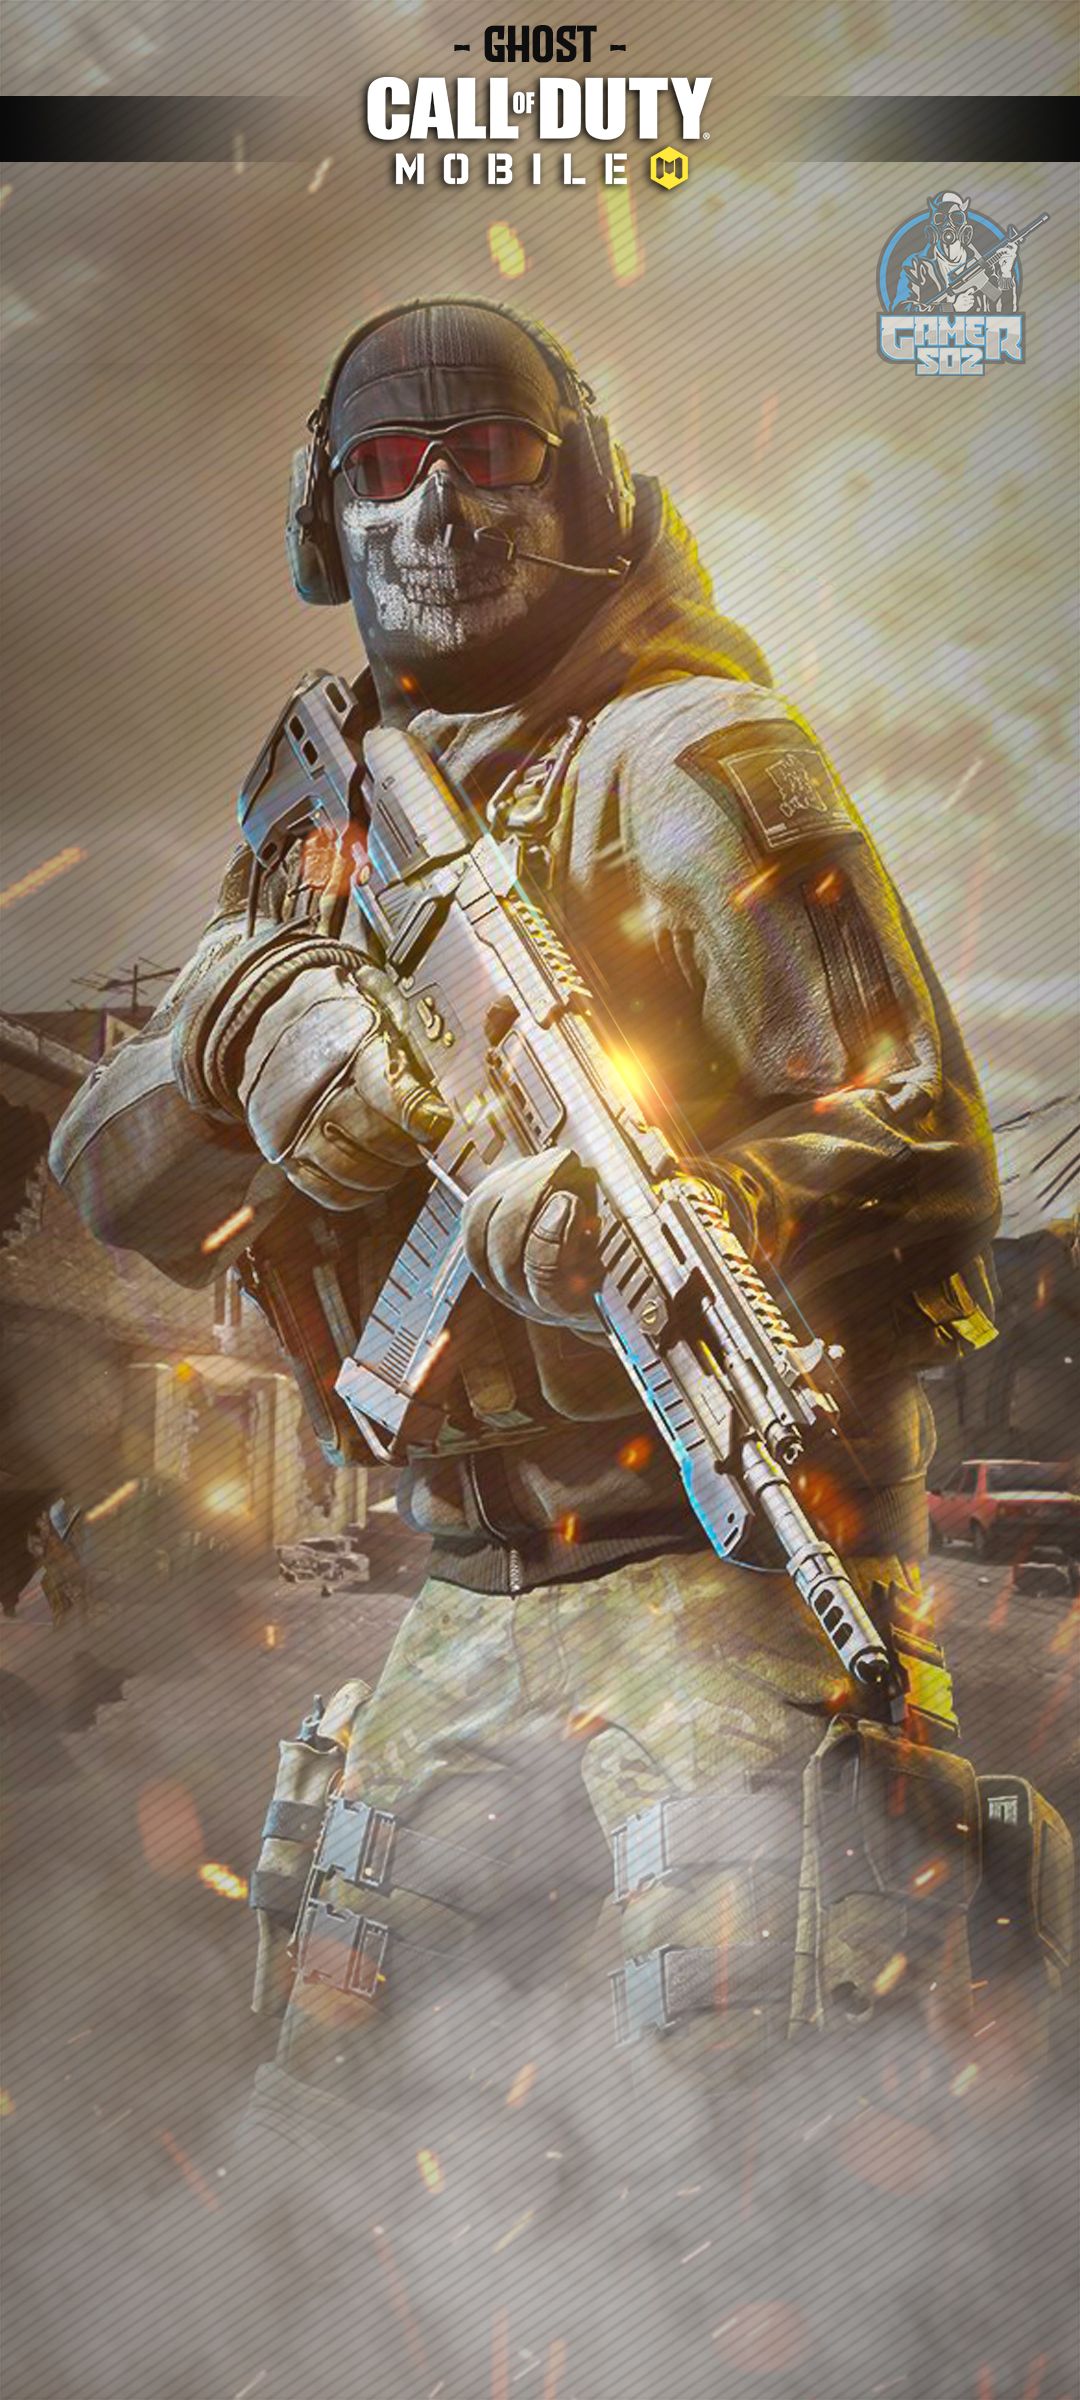 COD Ghost Mobile Wallpaper by TheBJO13 on DeviantArt